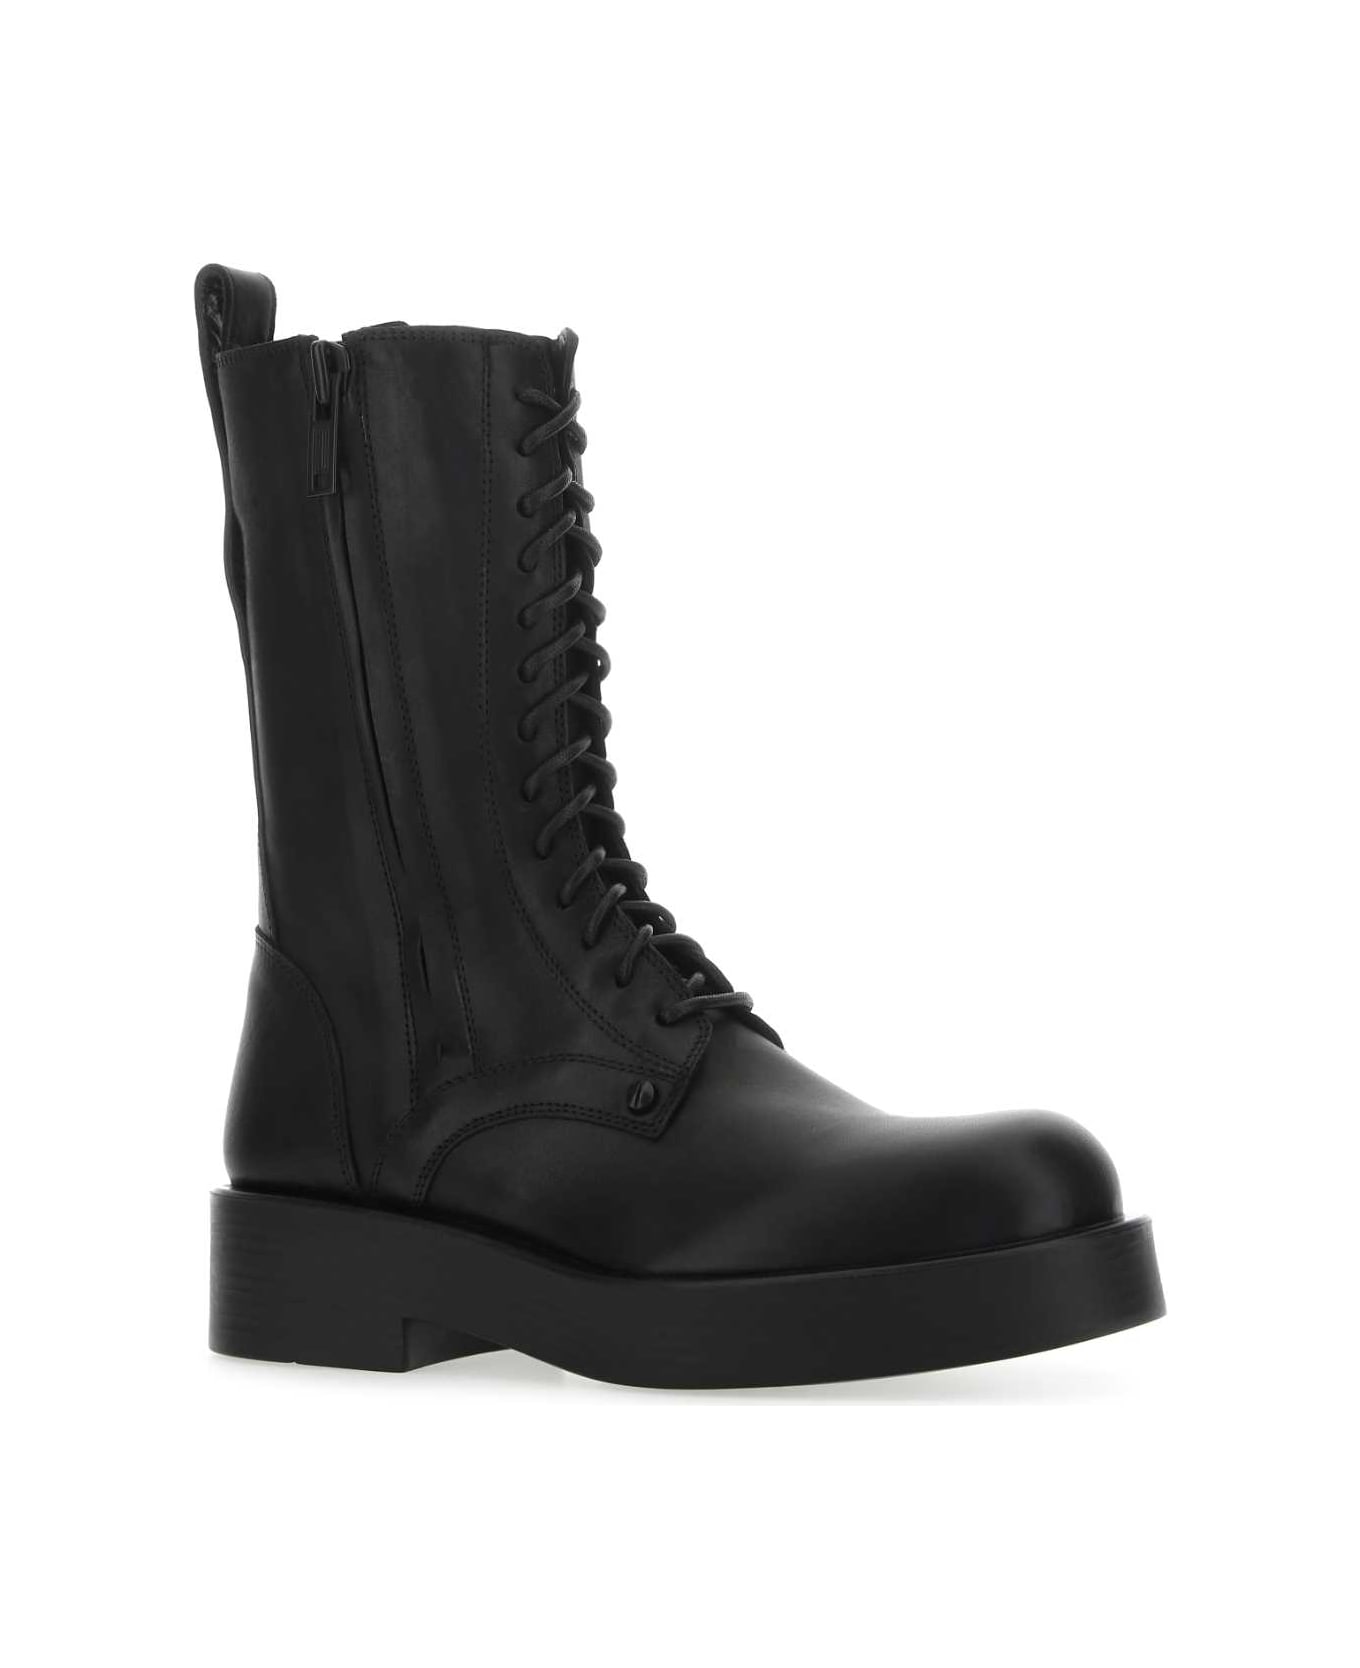 Ann Demeulemeester Black Leather Maxim Ankle Boots - 099 ブーツ